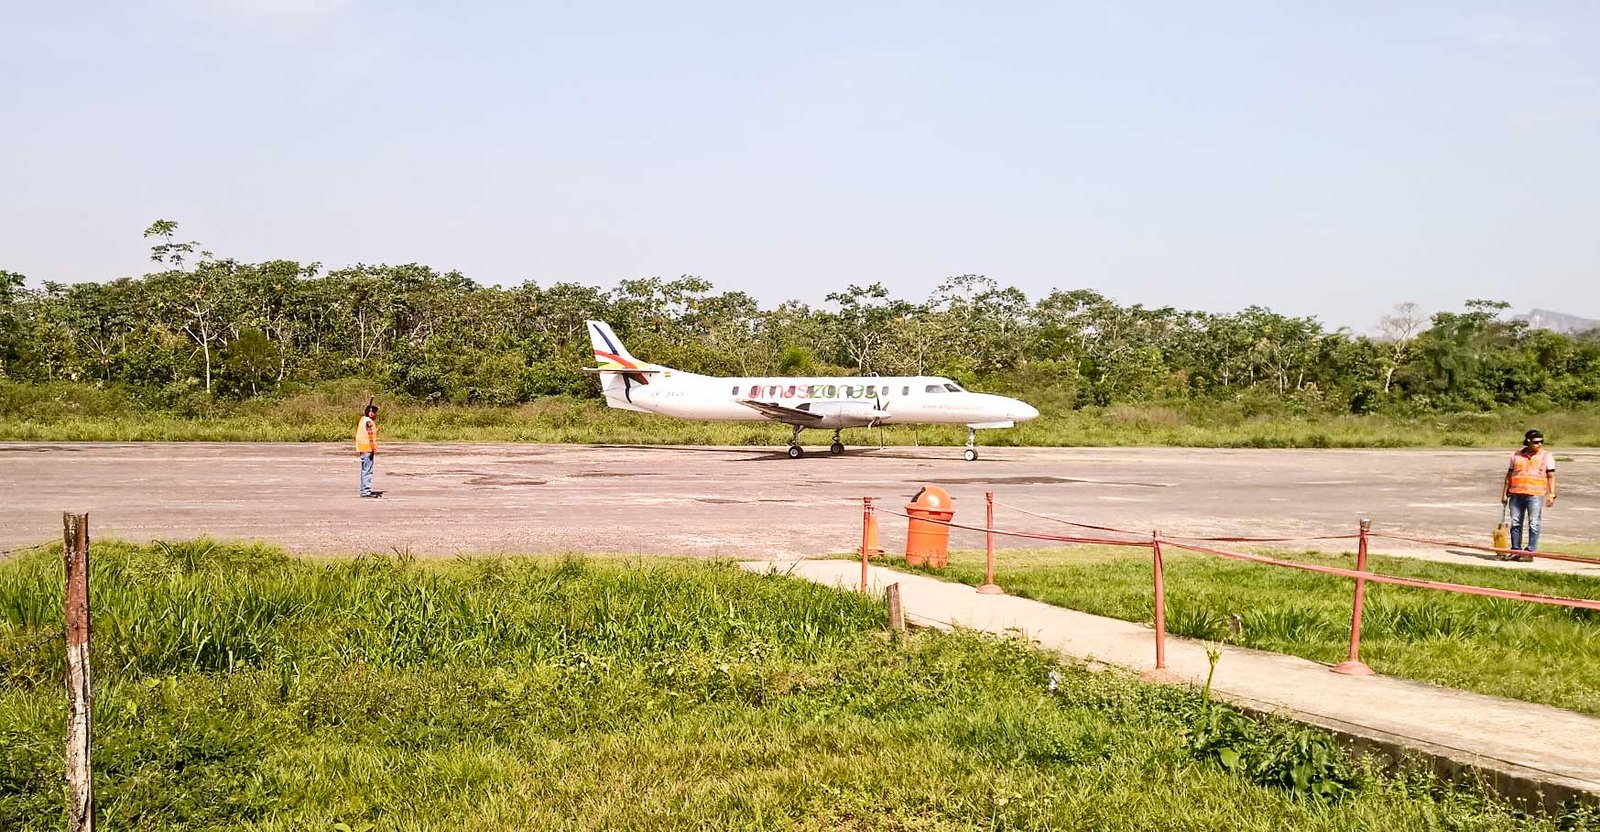 Rurrenabaque airport - welcome to the jungle